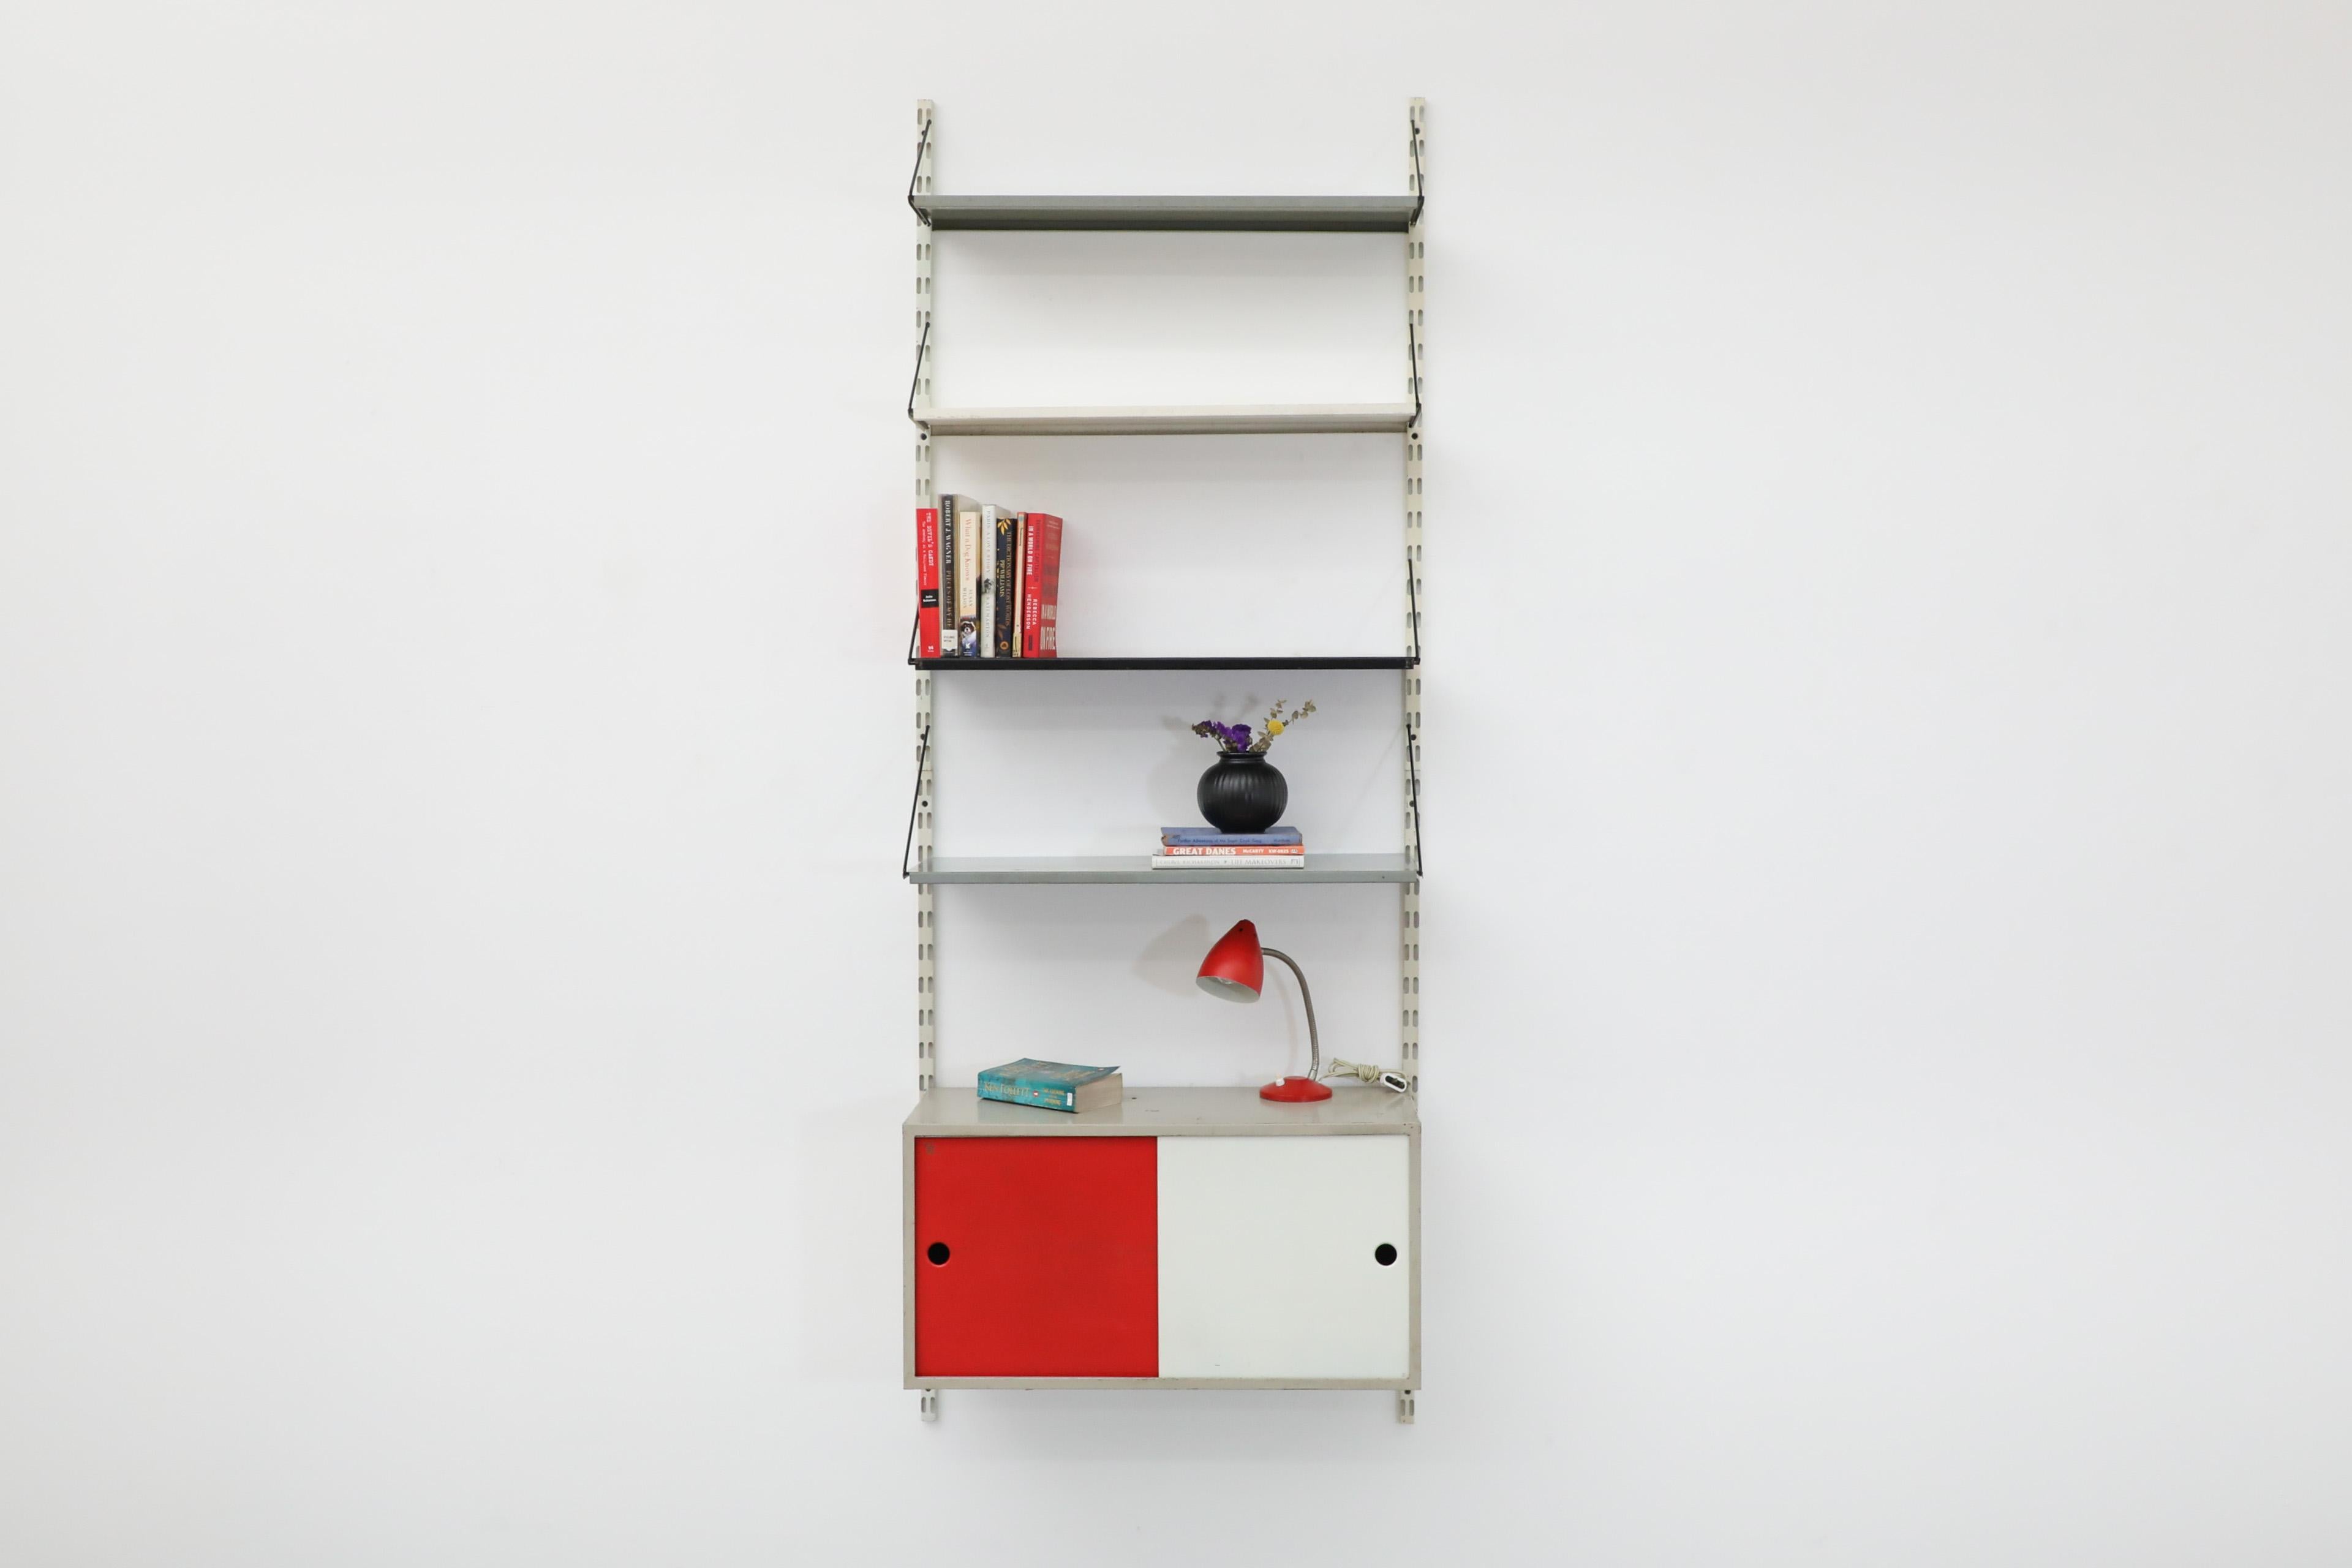 Pilastro adjustable and re-arrangeable industrial metal wall mounted shelving unit with red and white cabinet. Comes with four shelves, two gray, one white and one black with four risers which can be stacked vertically or horizontally. The unit